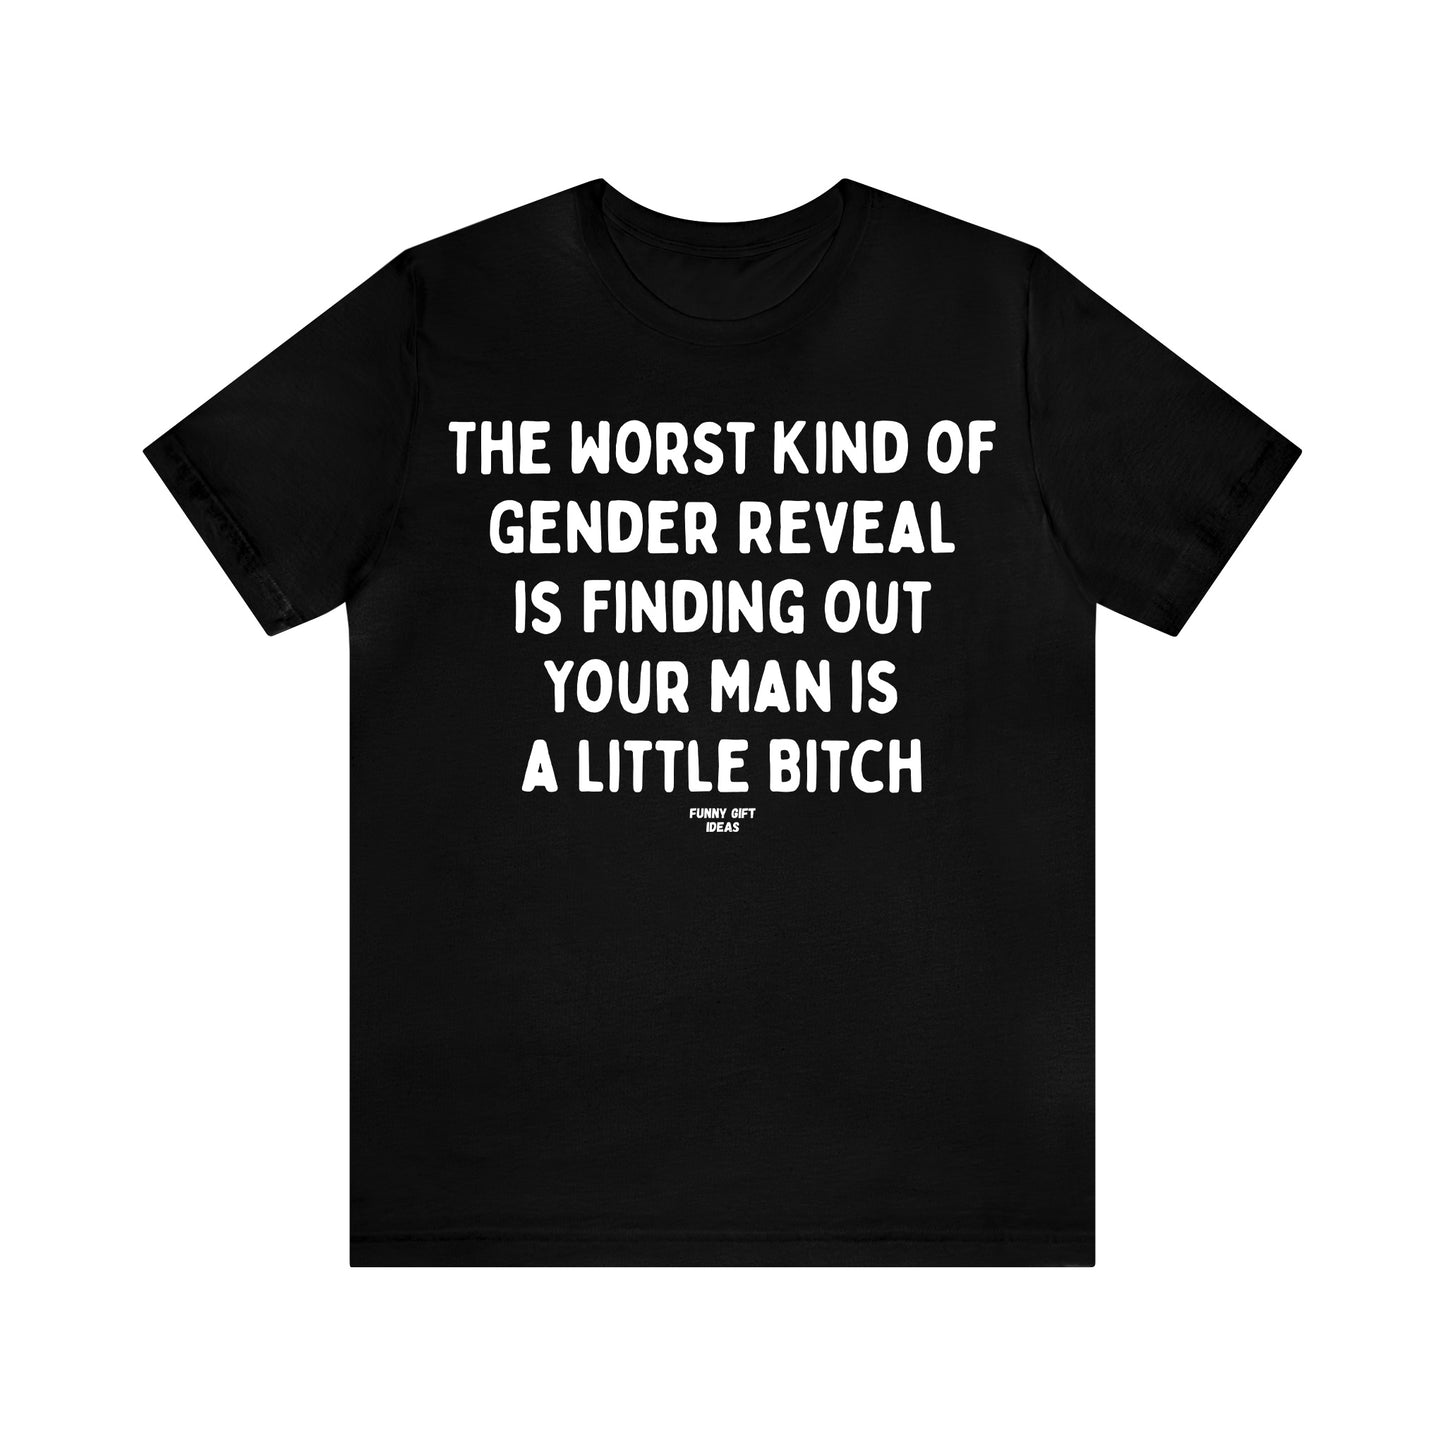 Funny Shirts for Women - The Worst Kind of Gender Reveal is Finding Out Your Man is a Little Bitch - Women's T Shirts